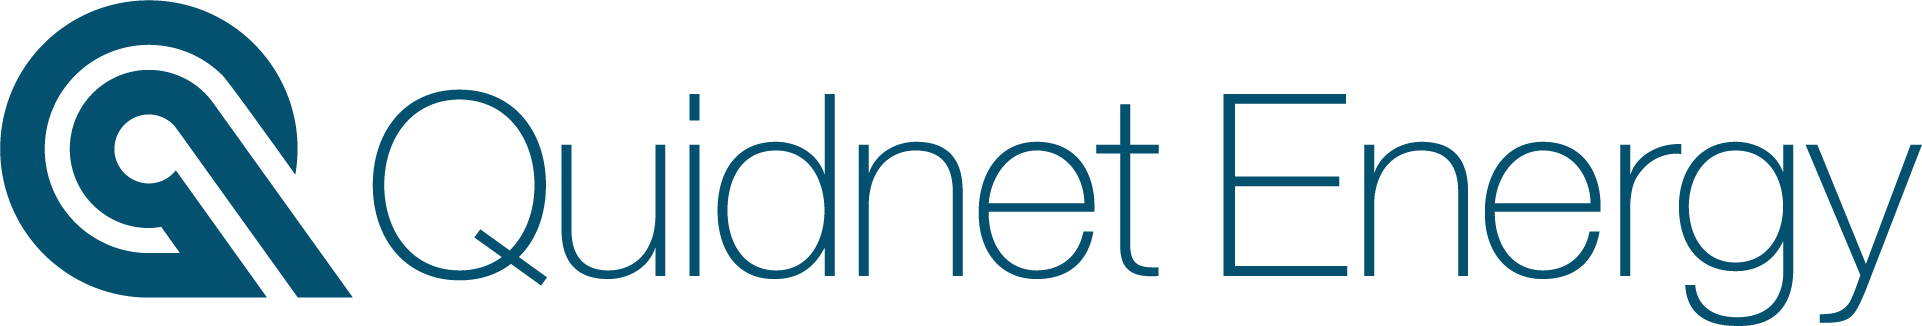 Quidnet Energy Logo_Teal_rgb (1).png